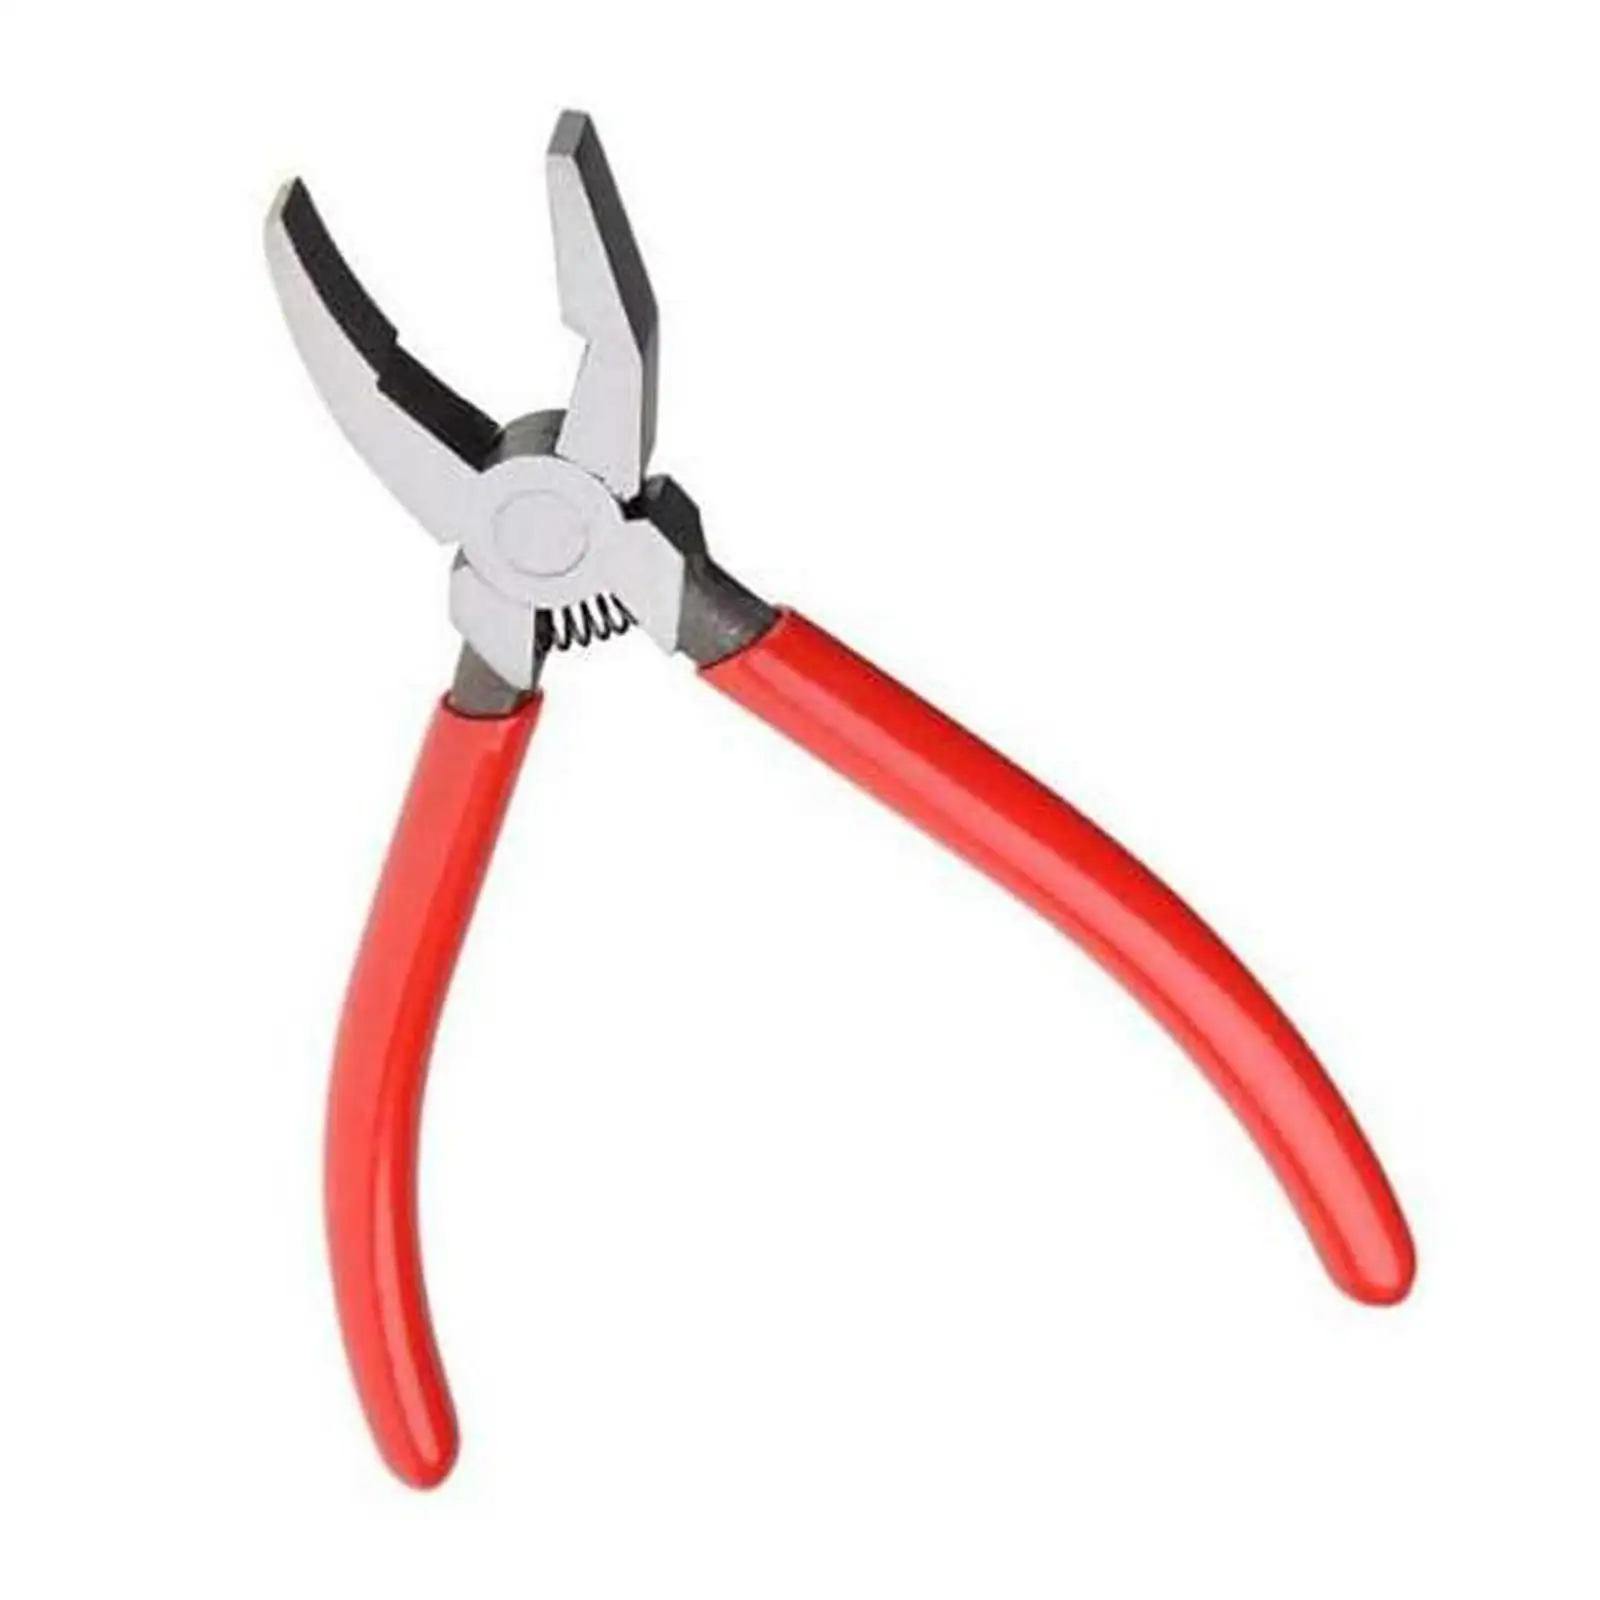 Glass Running Pliers Glass Cutter Tool Glass Cutting Tool Key Fob Pliers Glass Breaking Pliers for Stained Glass Work Tiles